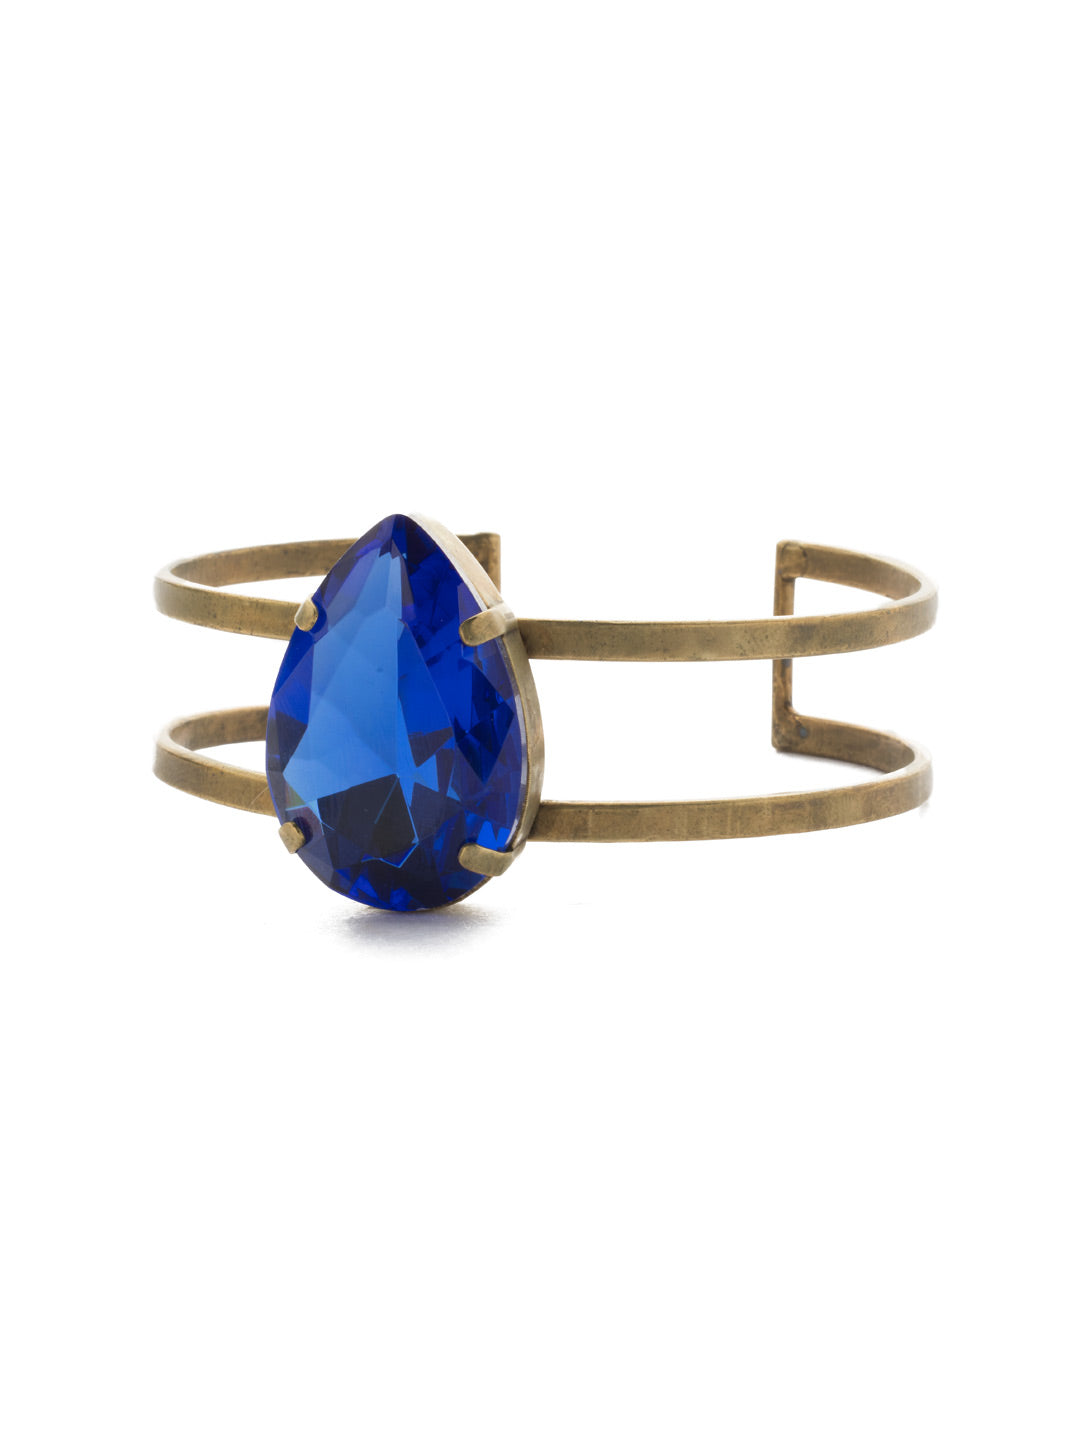 Ellaria Cuff Bracelet - BEF1AGGOT - <p>This bracelet is adorned with a marbled stone cast in the middle of an iron cuff. This can be a perfect piece to go along with any daytime outfit and is a slip-on style. From Sorrelli's Game of Jewel Tones collection in our Antique Gold-tone finish.</p>